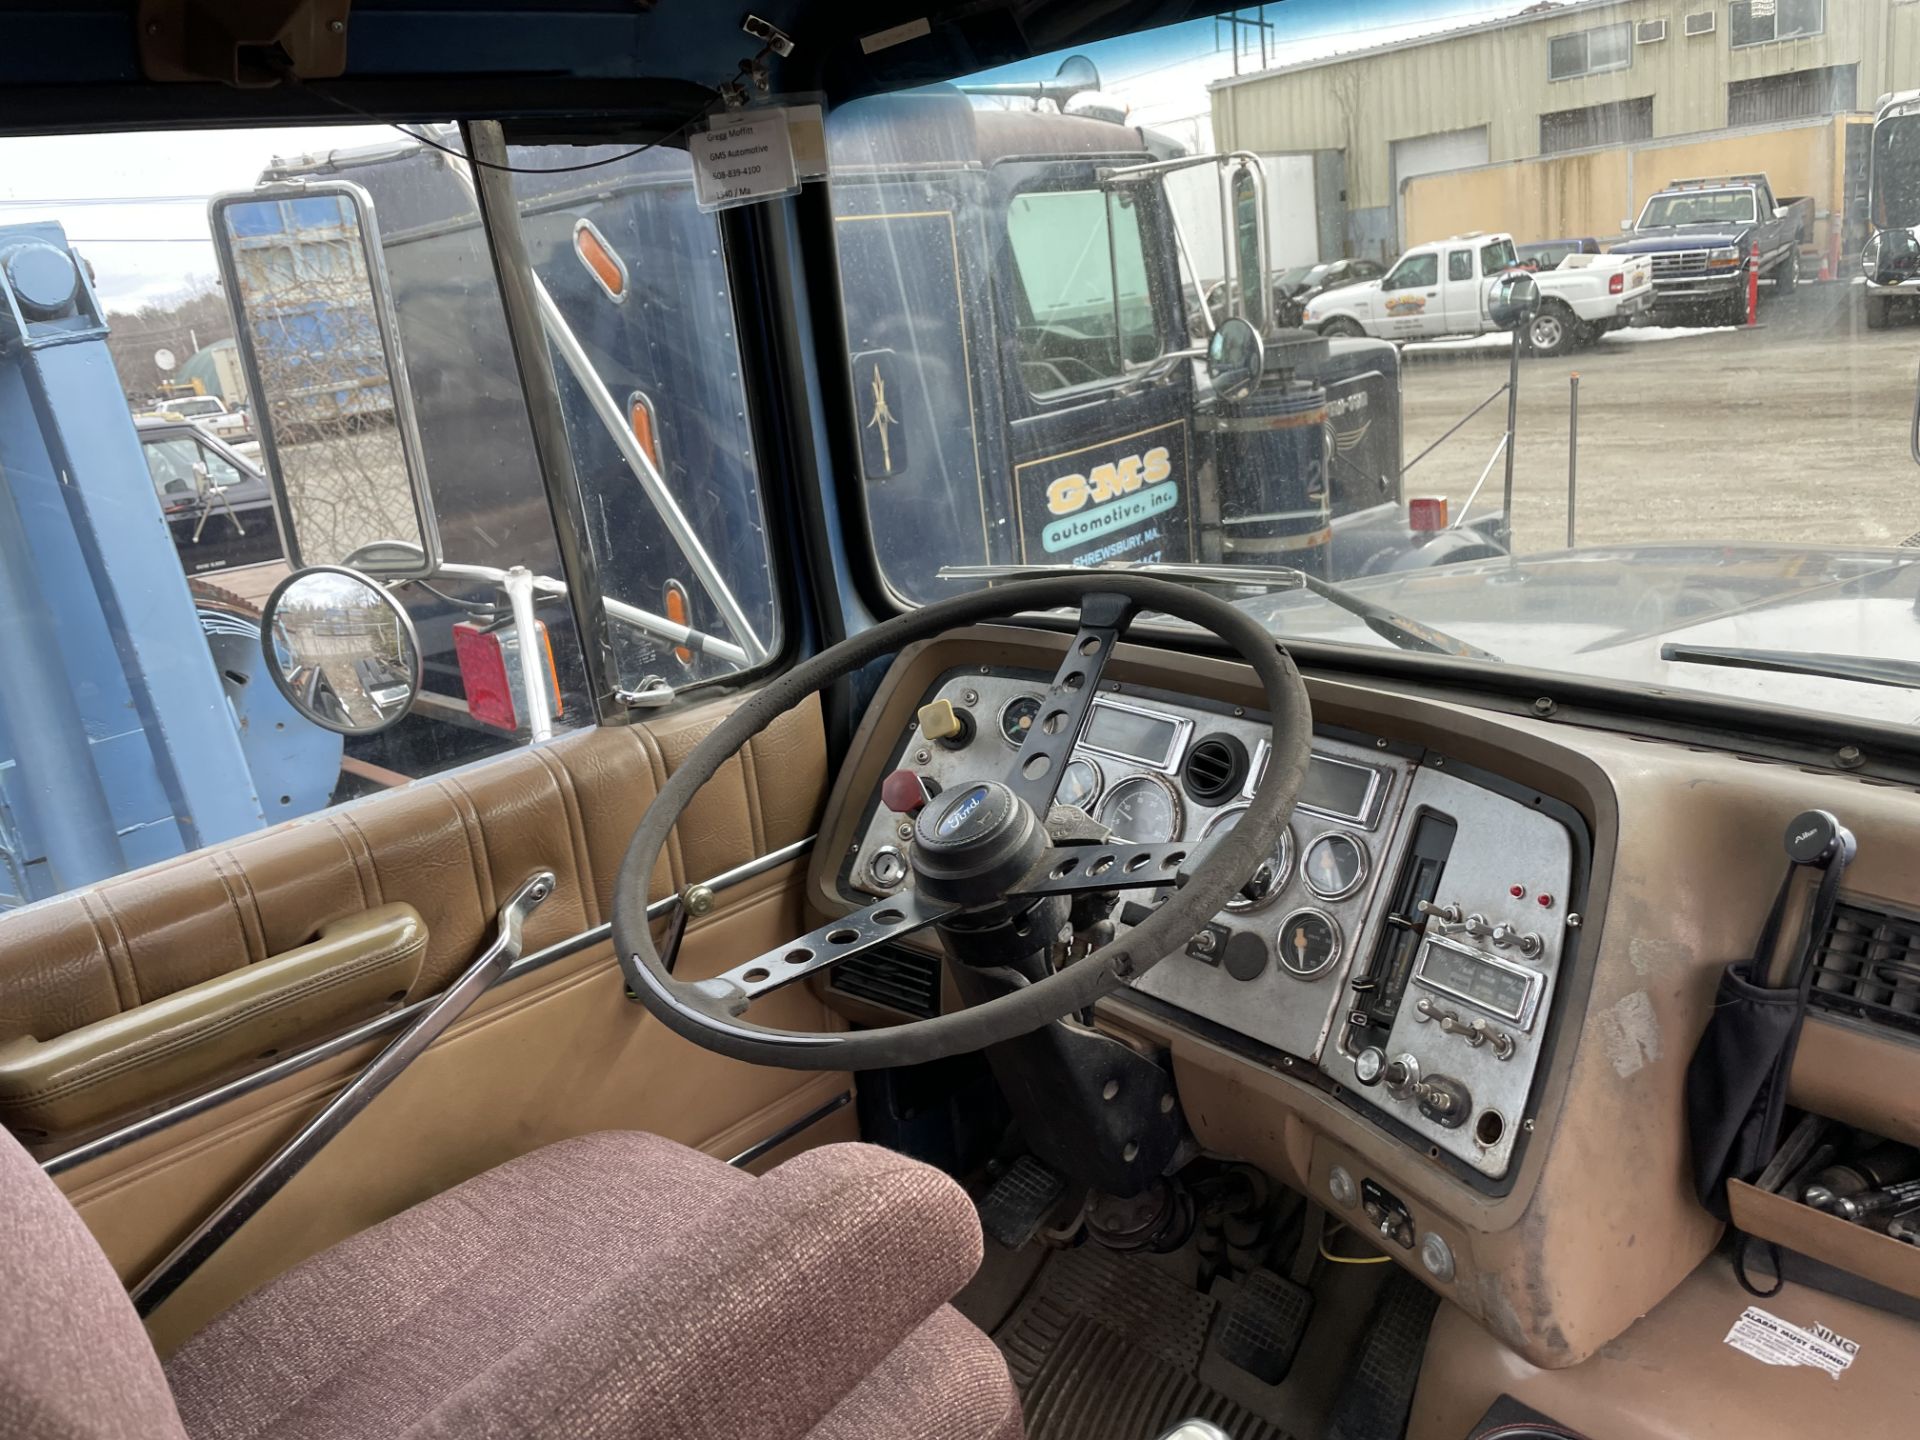 1995 Ford Aero MAX L-9000 10 Wheel Day Cab. Eaton Fuller Trans., Detroit Diesel Series 60 Engine, - Image 11 of 11